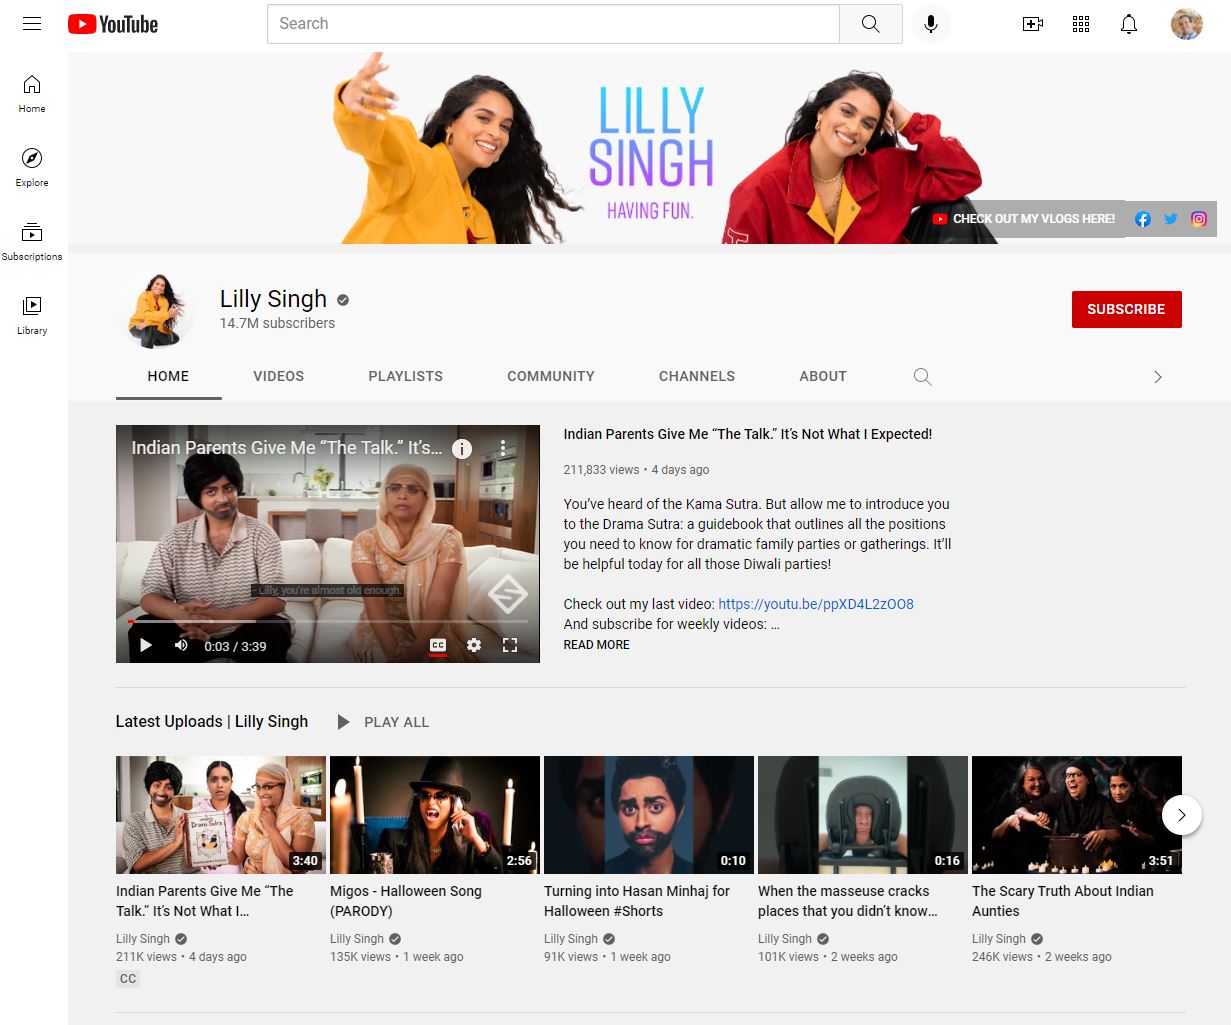 Best Formatted YouTube Channel, Lilly Singh